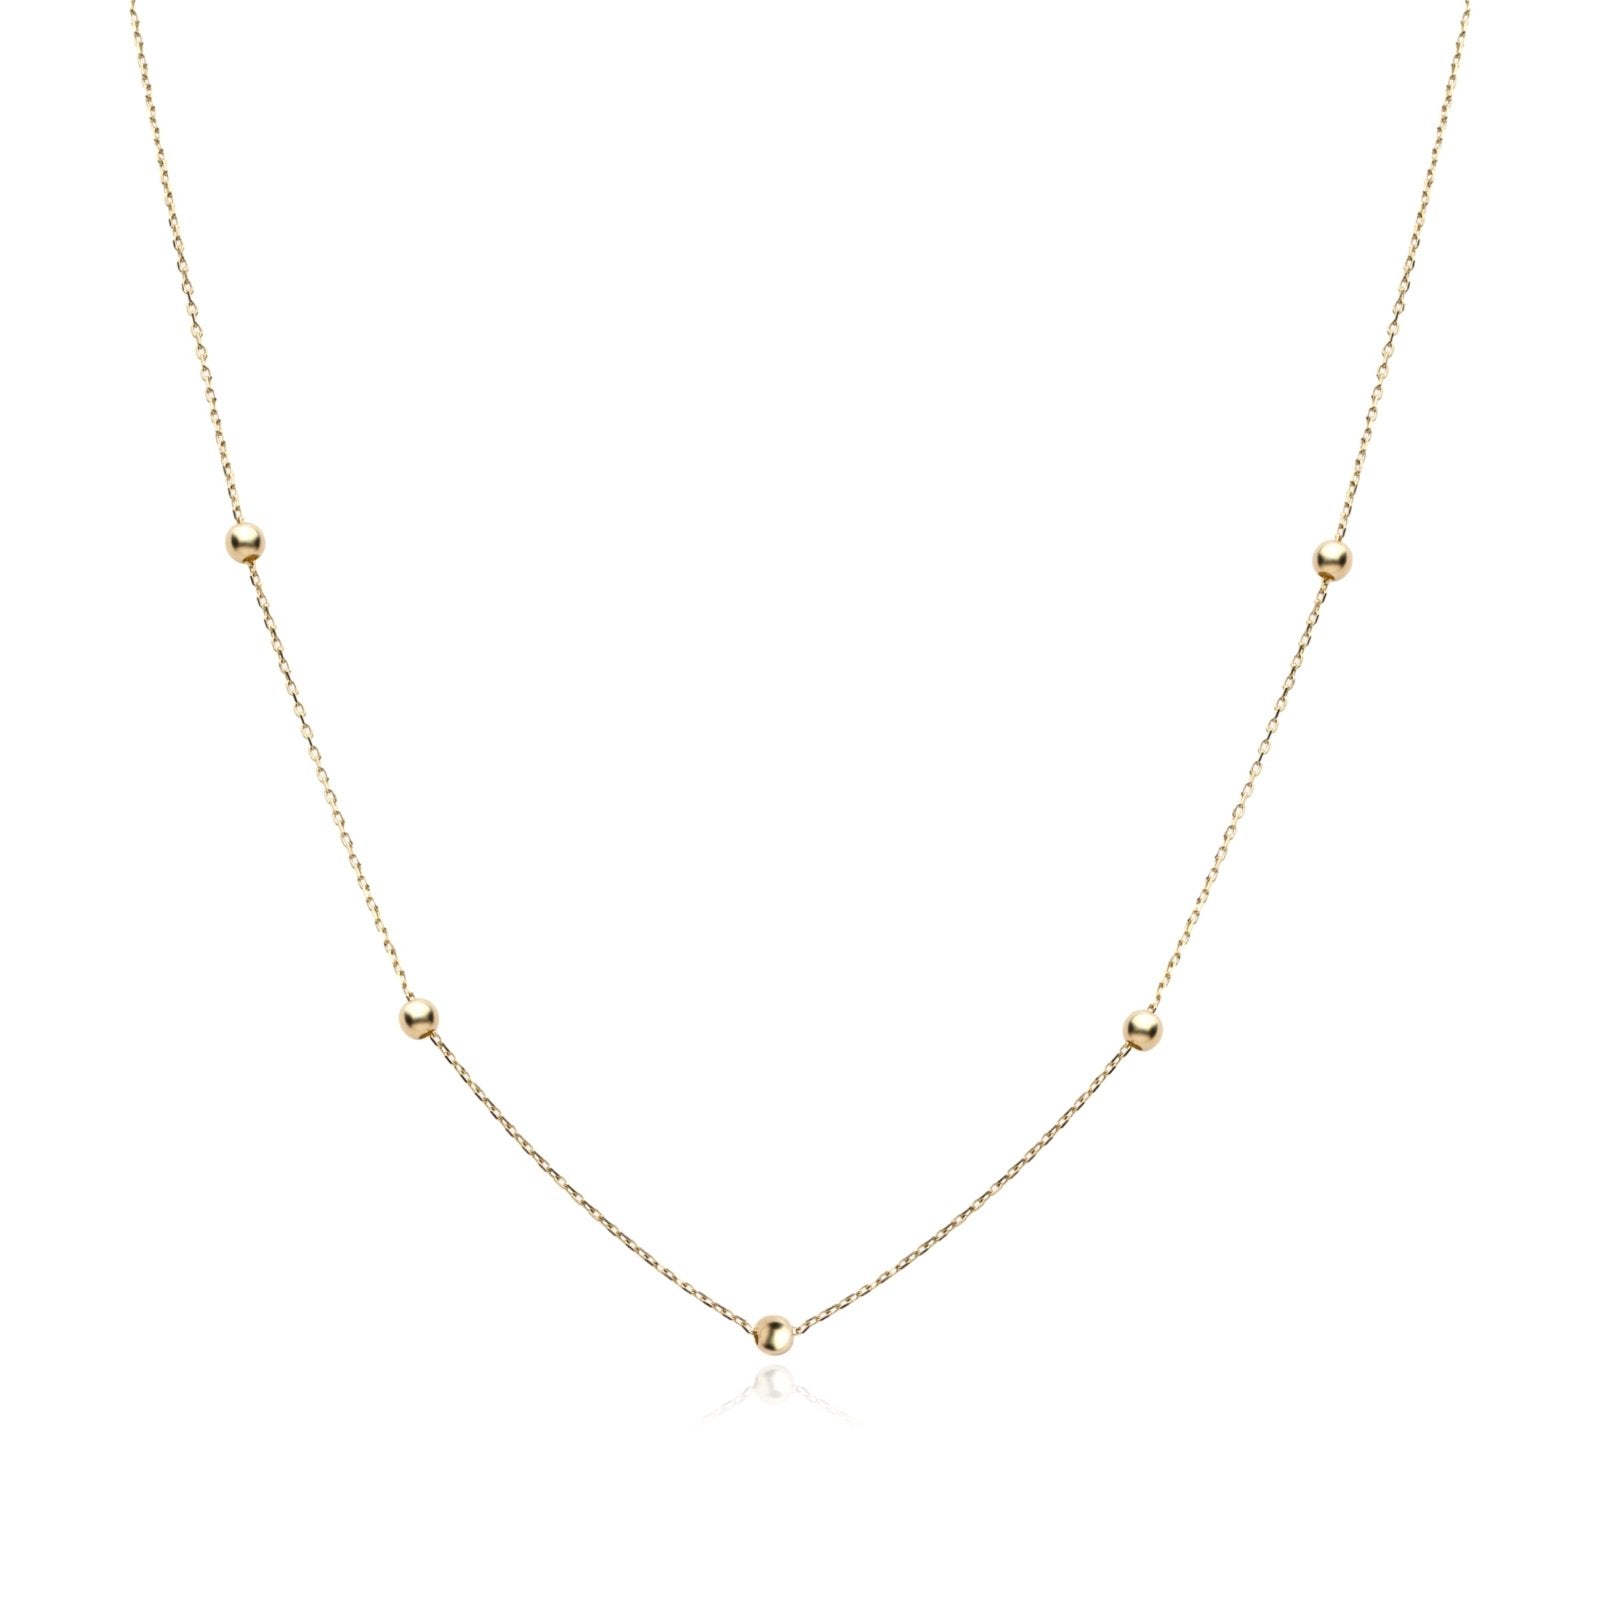 Beaded Station Necklace Necklaces Estella Collection 17821 14k Chain Yellow Gold #tag4# #tag5# #tag6# #tag7# #tag8# #tag9# #tag10# 14K Yellow Gold 18"